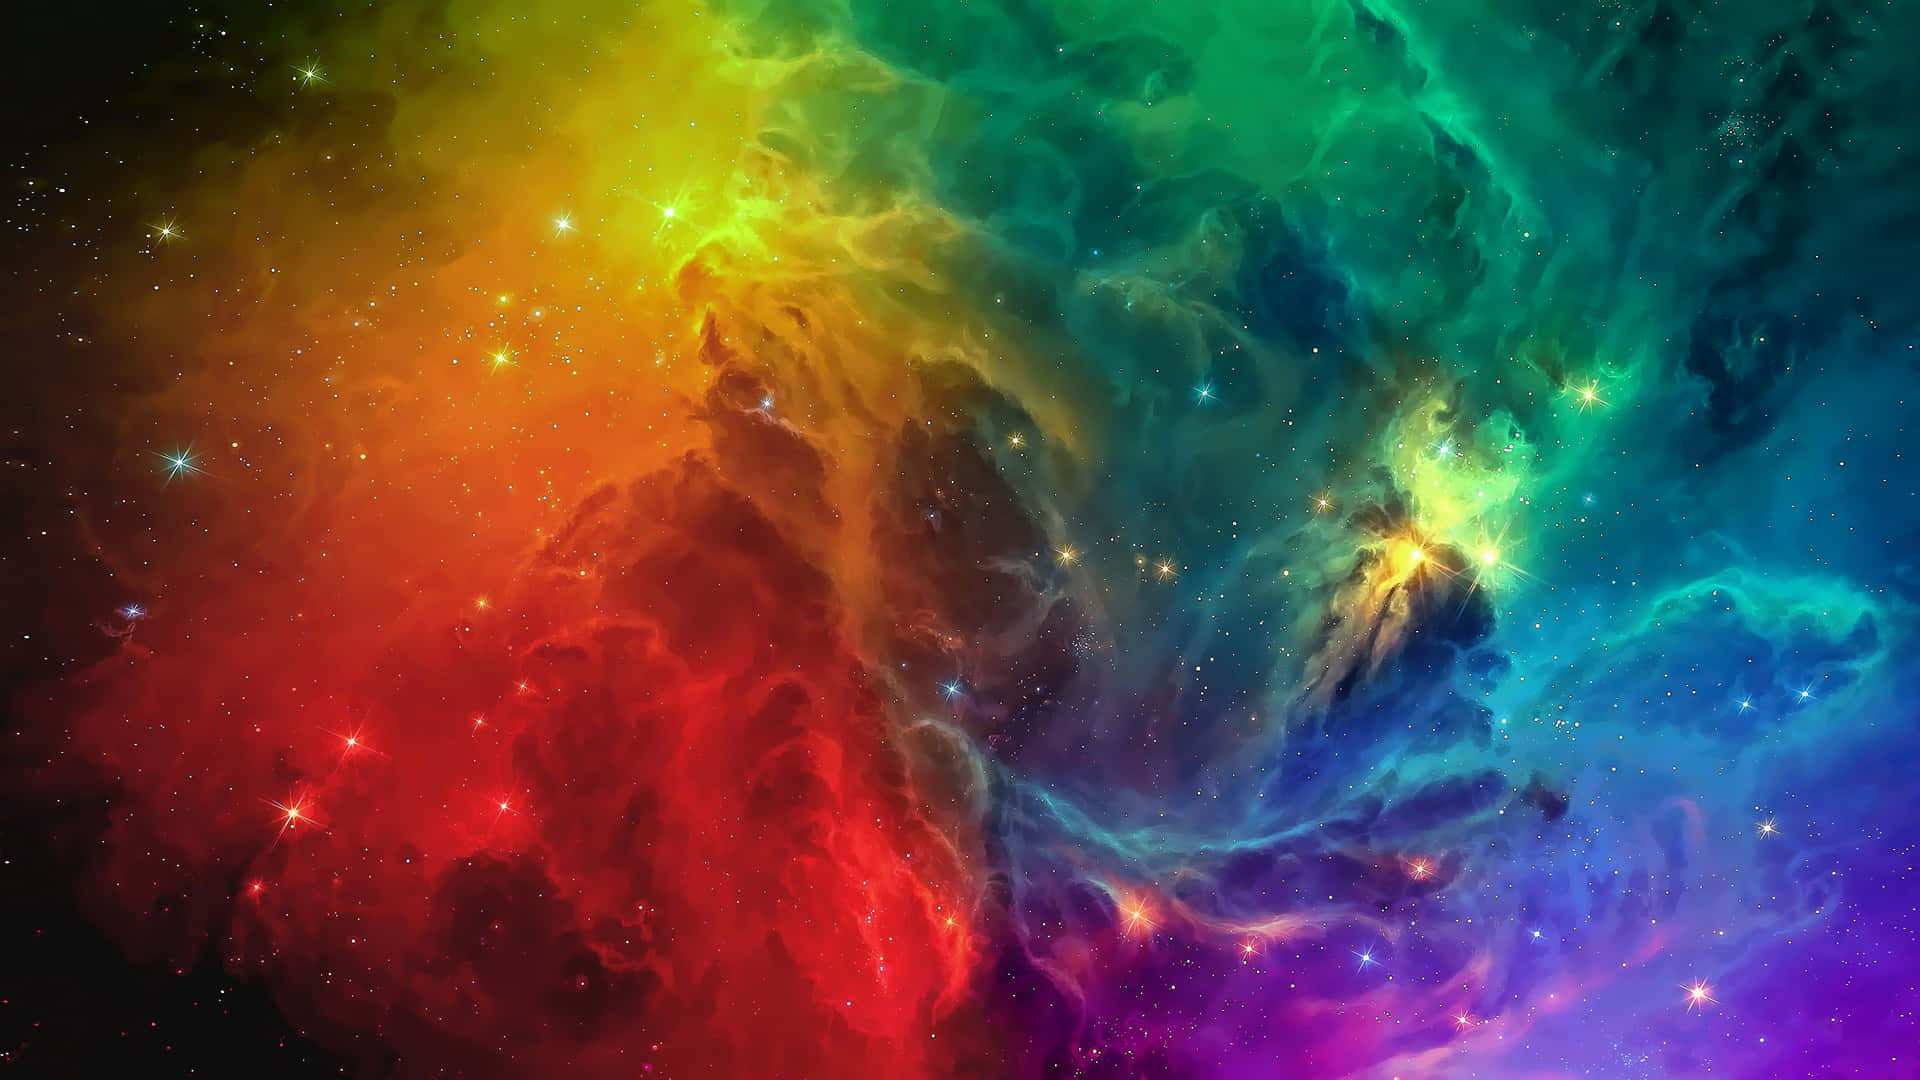 colorful outer space wallpaper